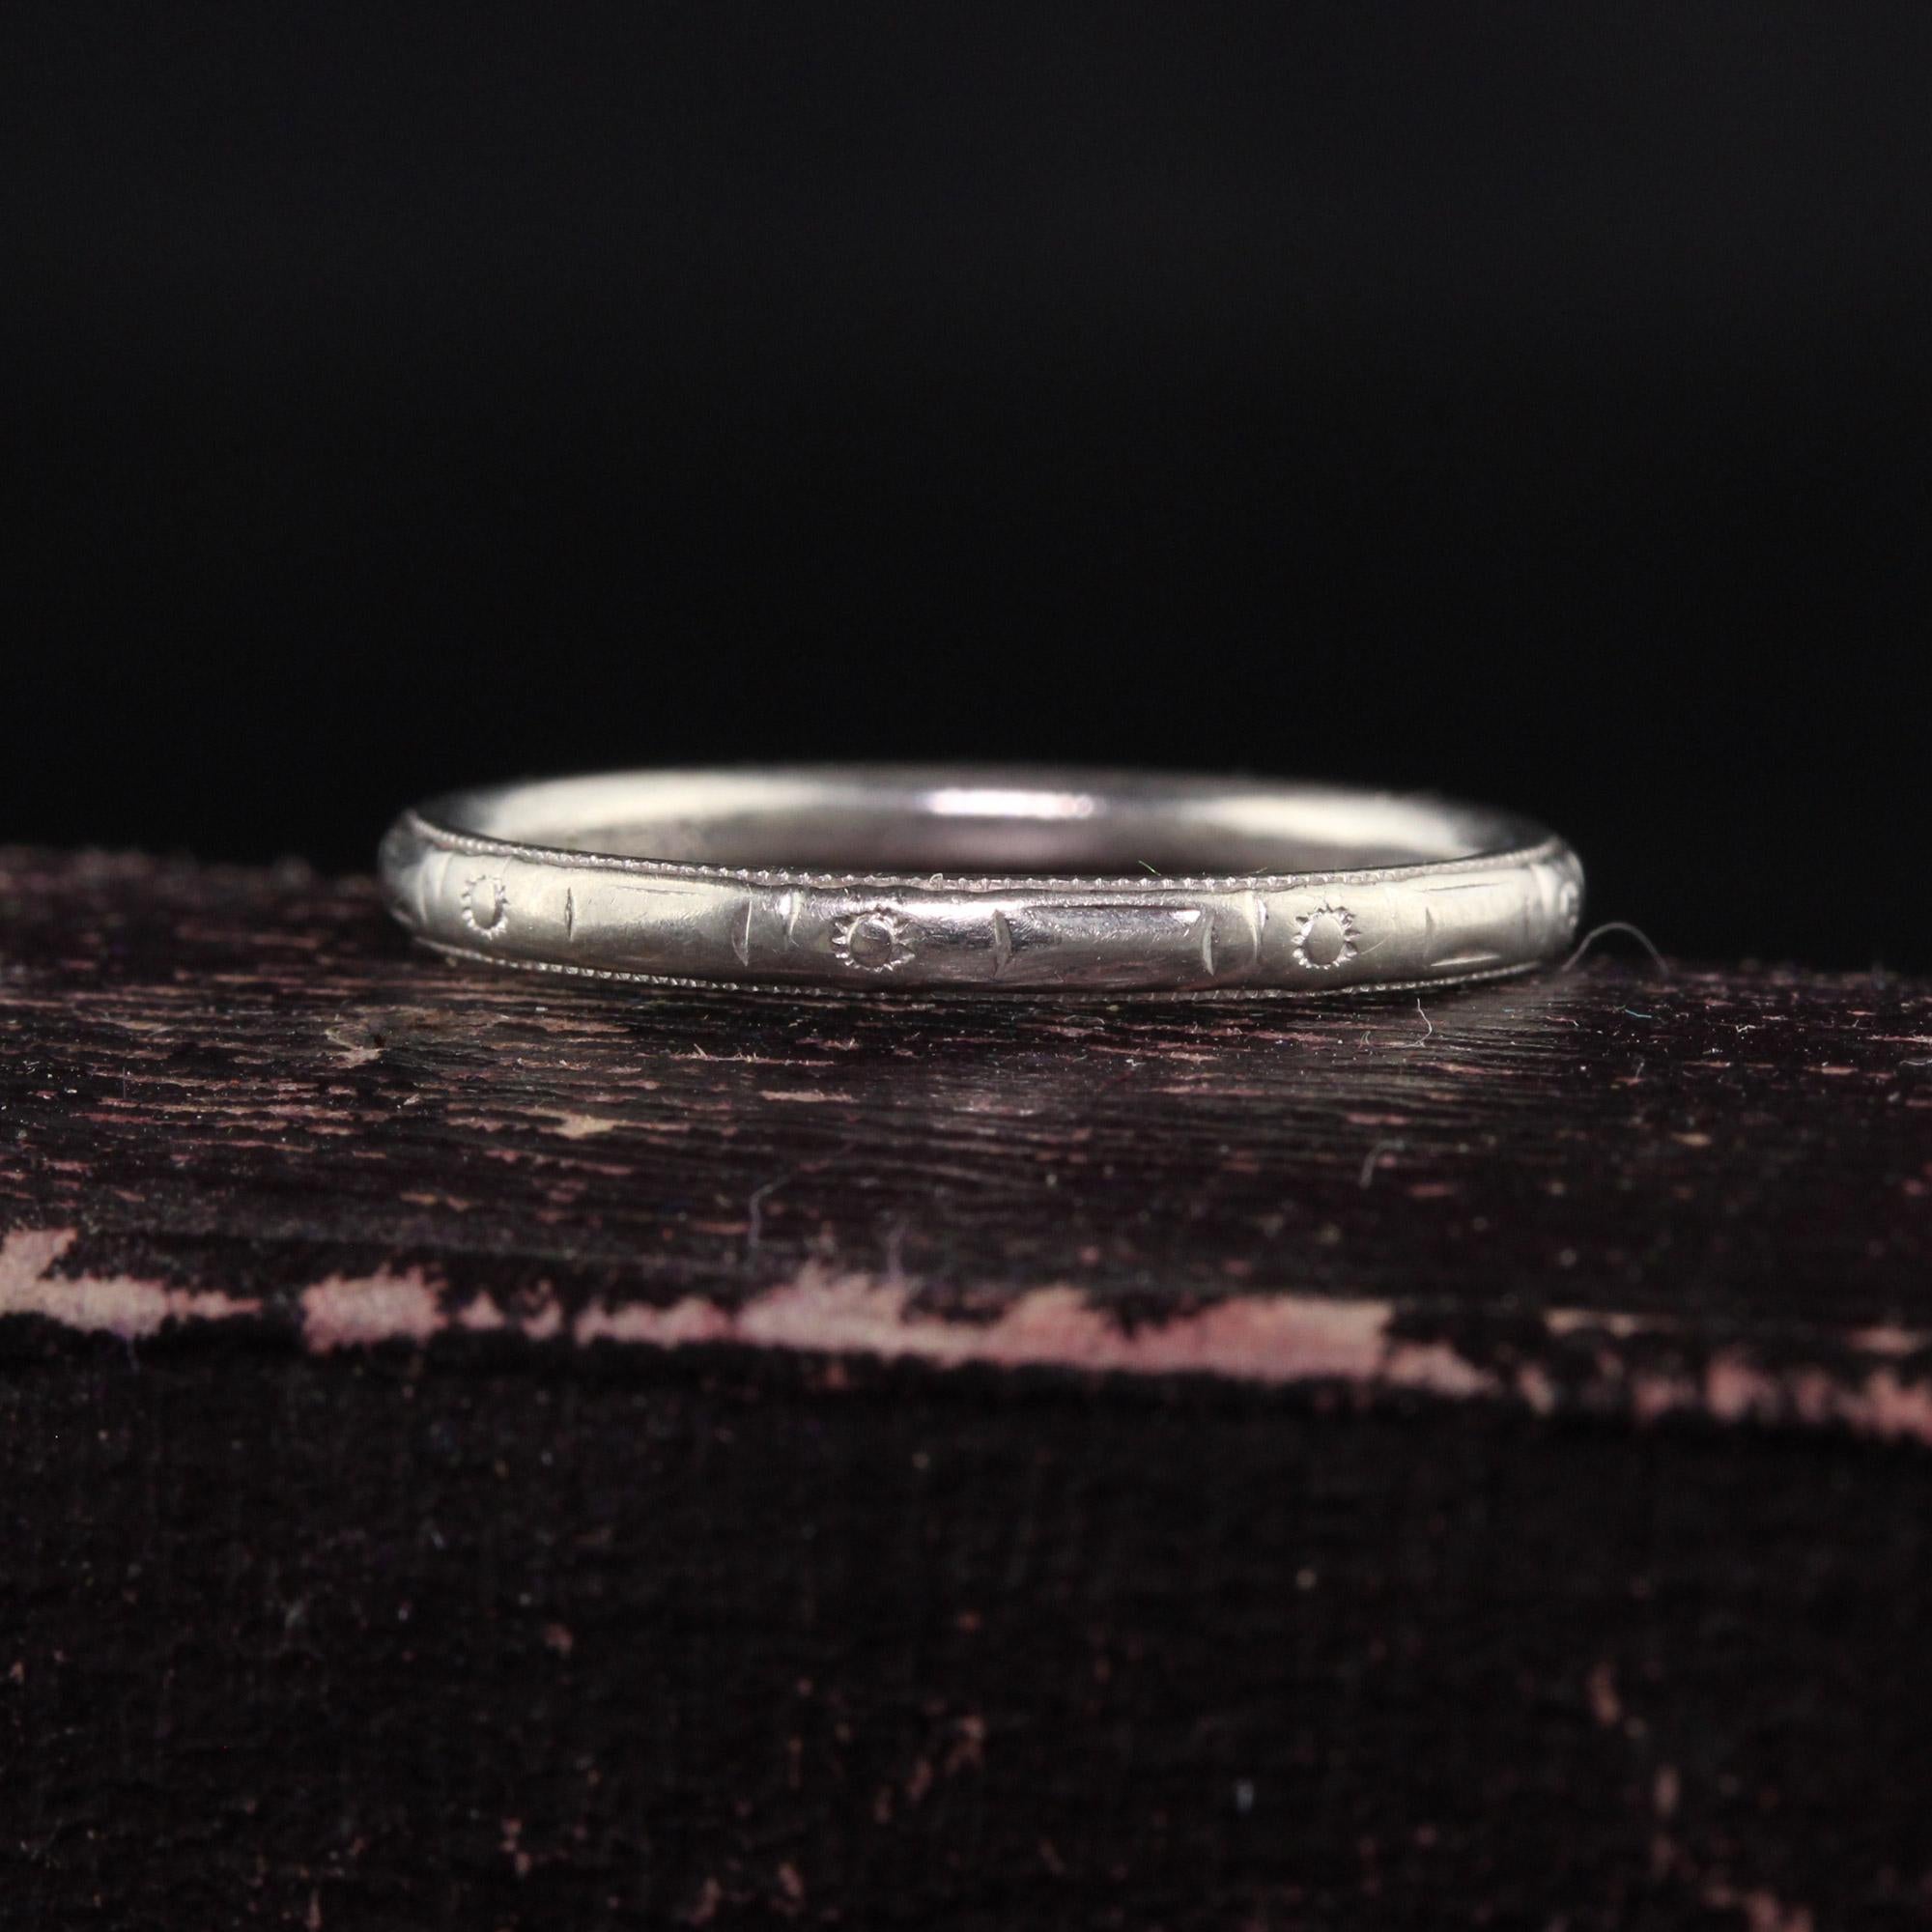 Beautiful Antique Art Deco Belais 18K White Gold Engraved Wedding Band - Size 5. This gorgeous wedding band is crafted in 18k white gold. The band has engravings going around the entire ring and is in great condition.

Item #R1274

Metal: 18K White